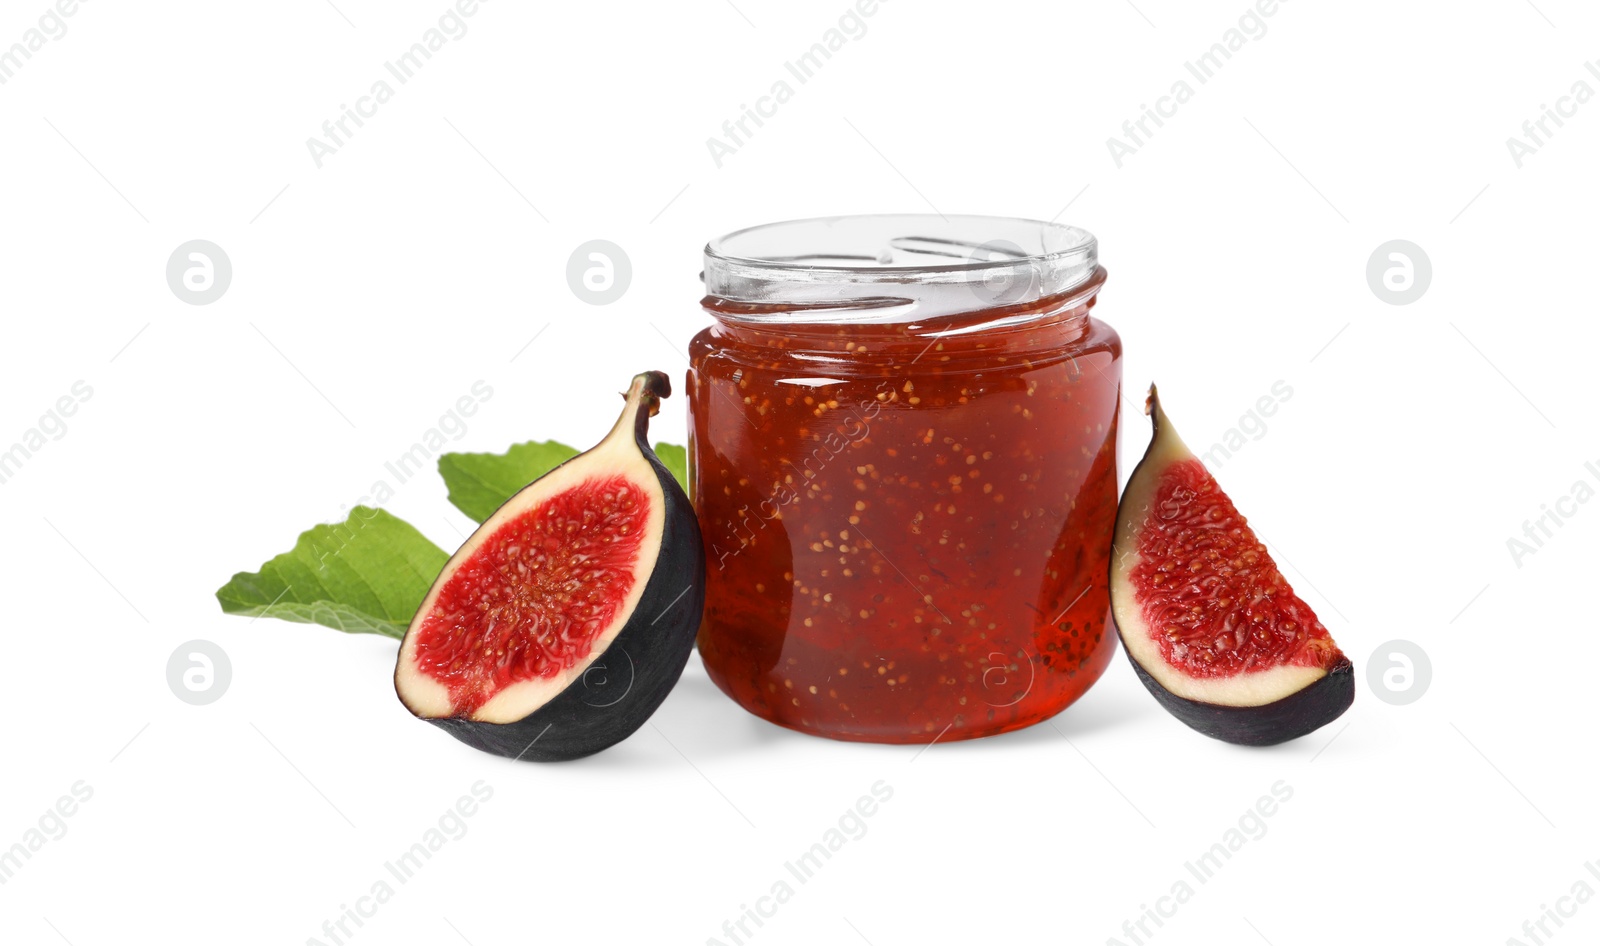 Photo of Glass jar with tasty sweet jam, green leaf and fresh figs isolated on white